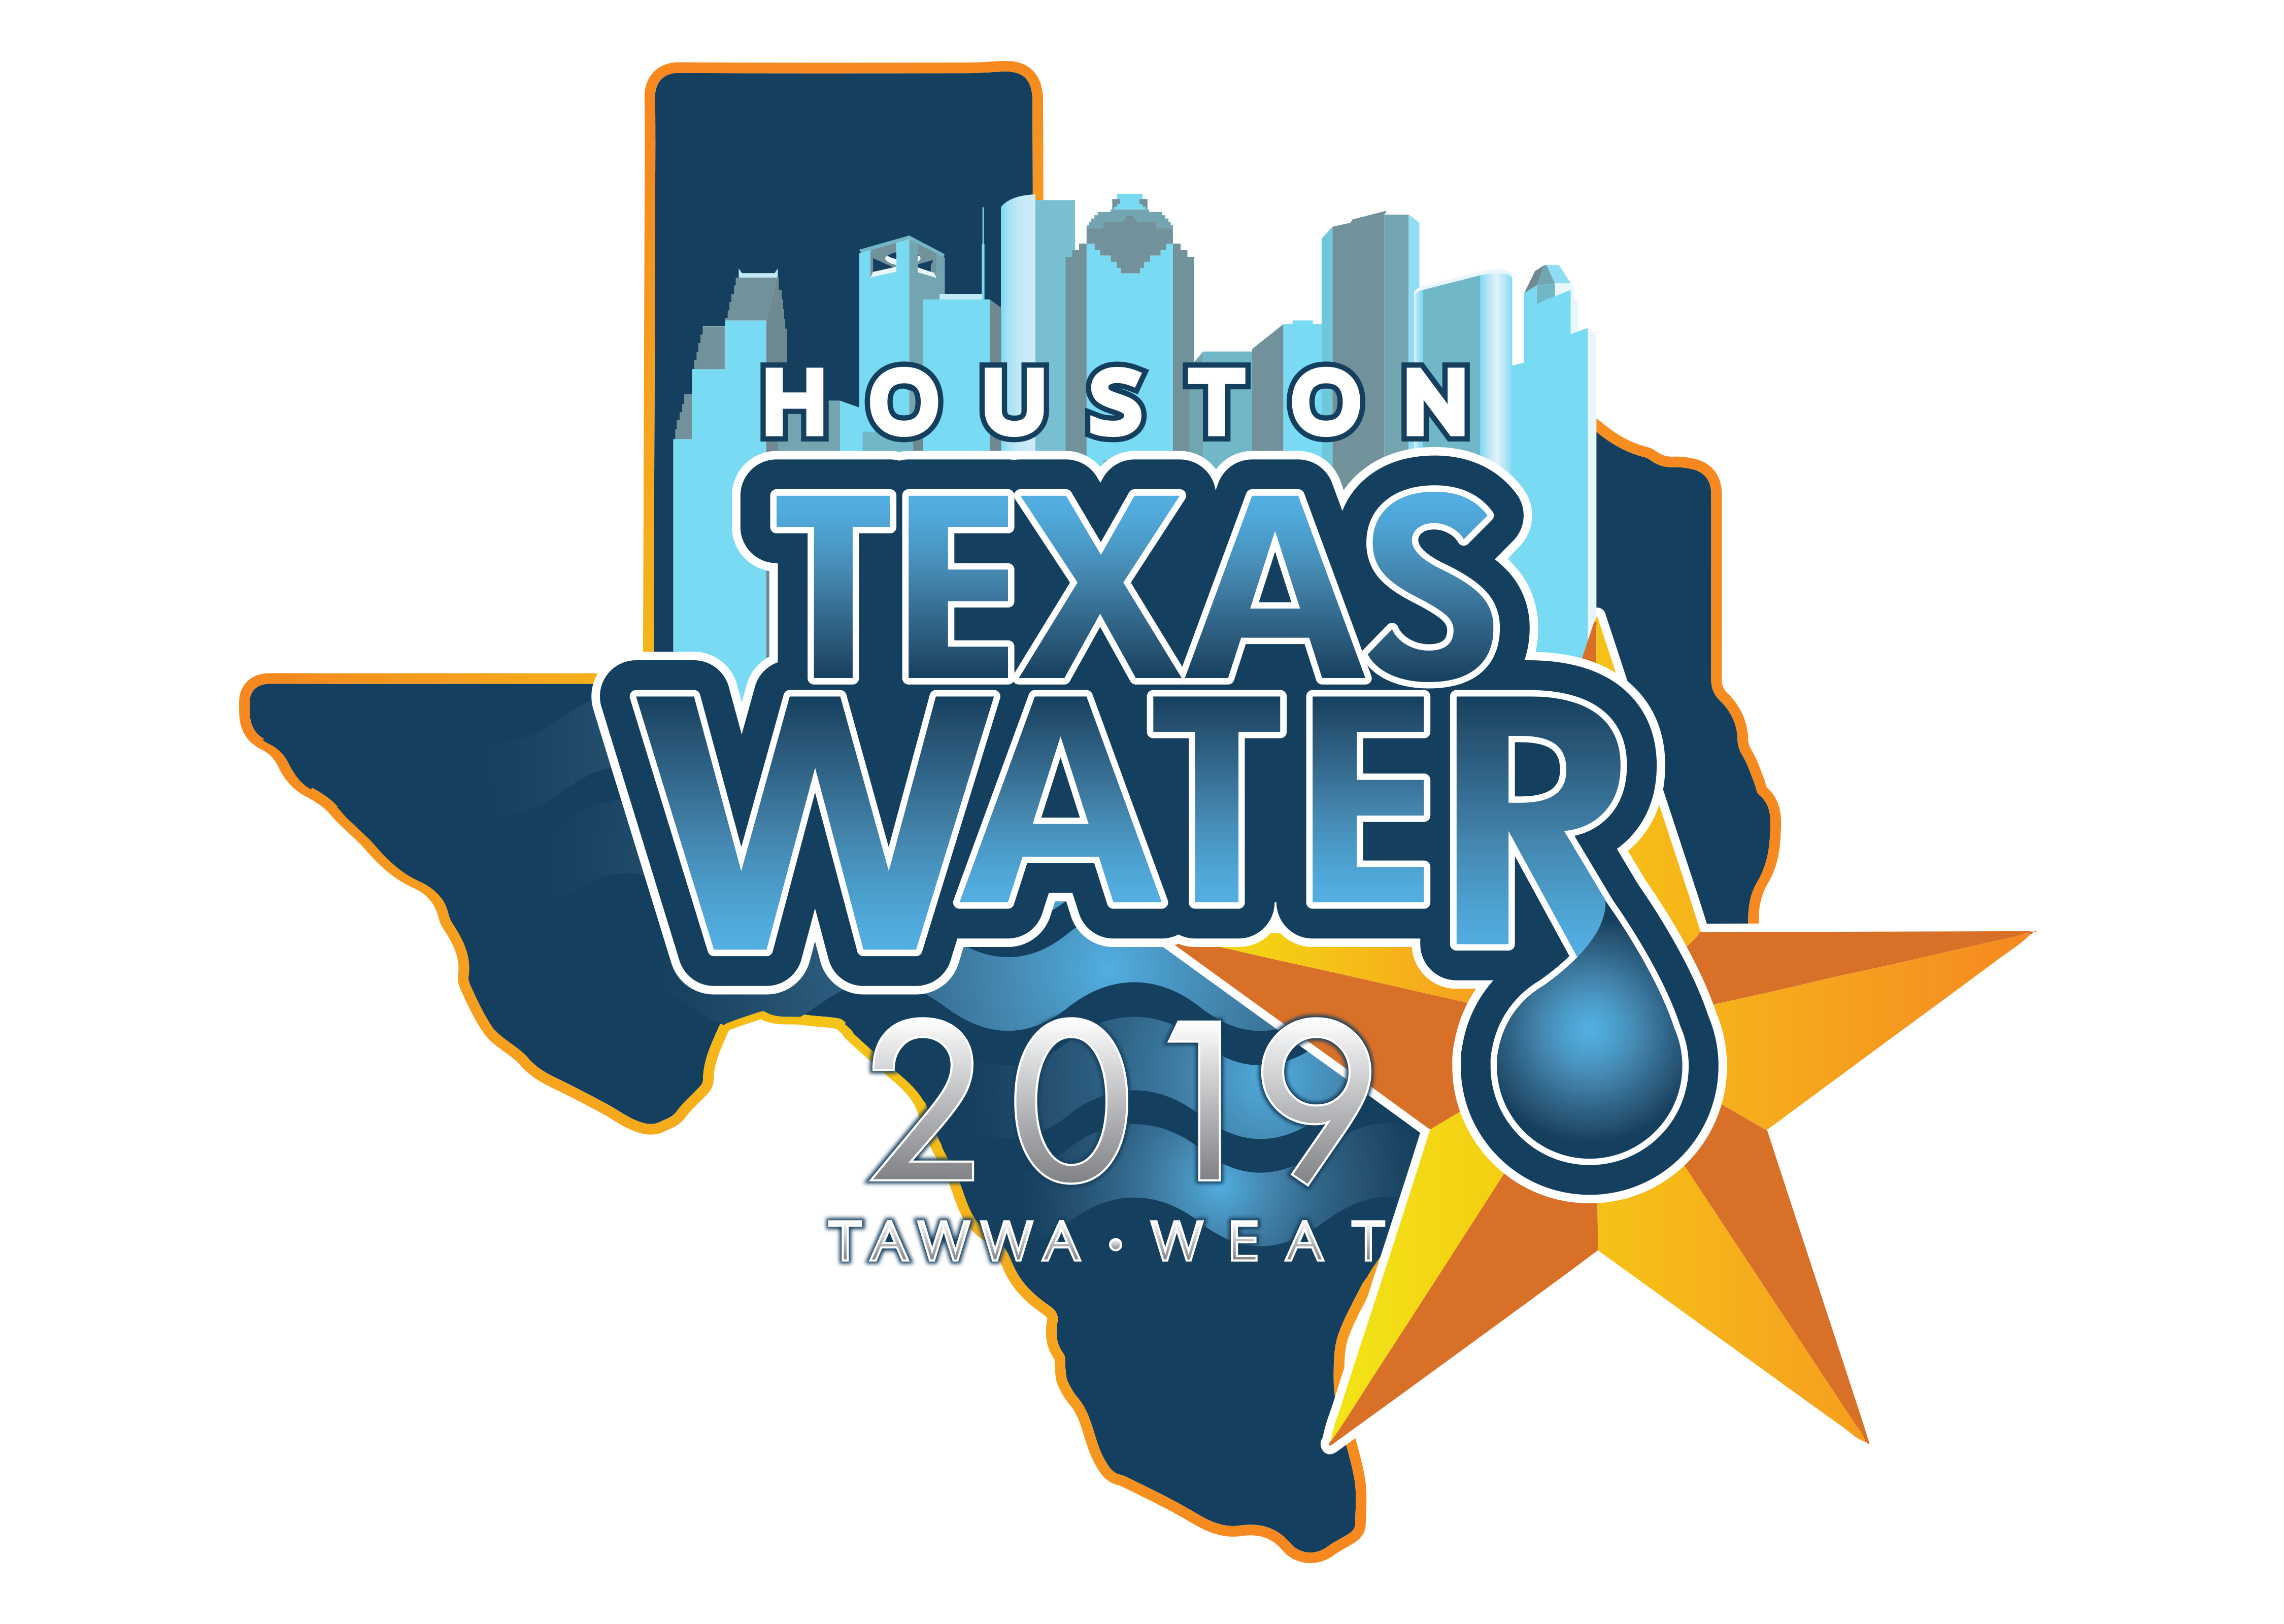 Dr. Collier to Present at Texas Water 2019